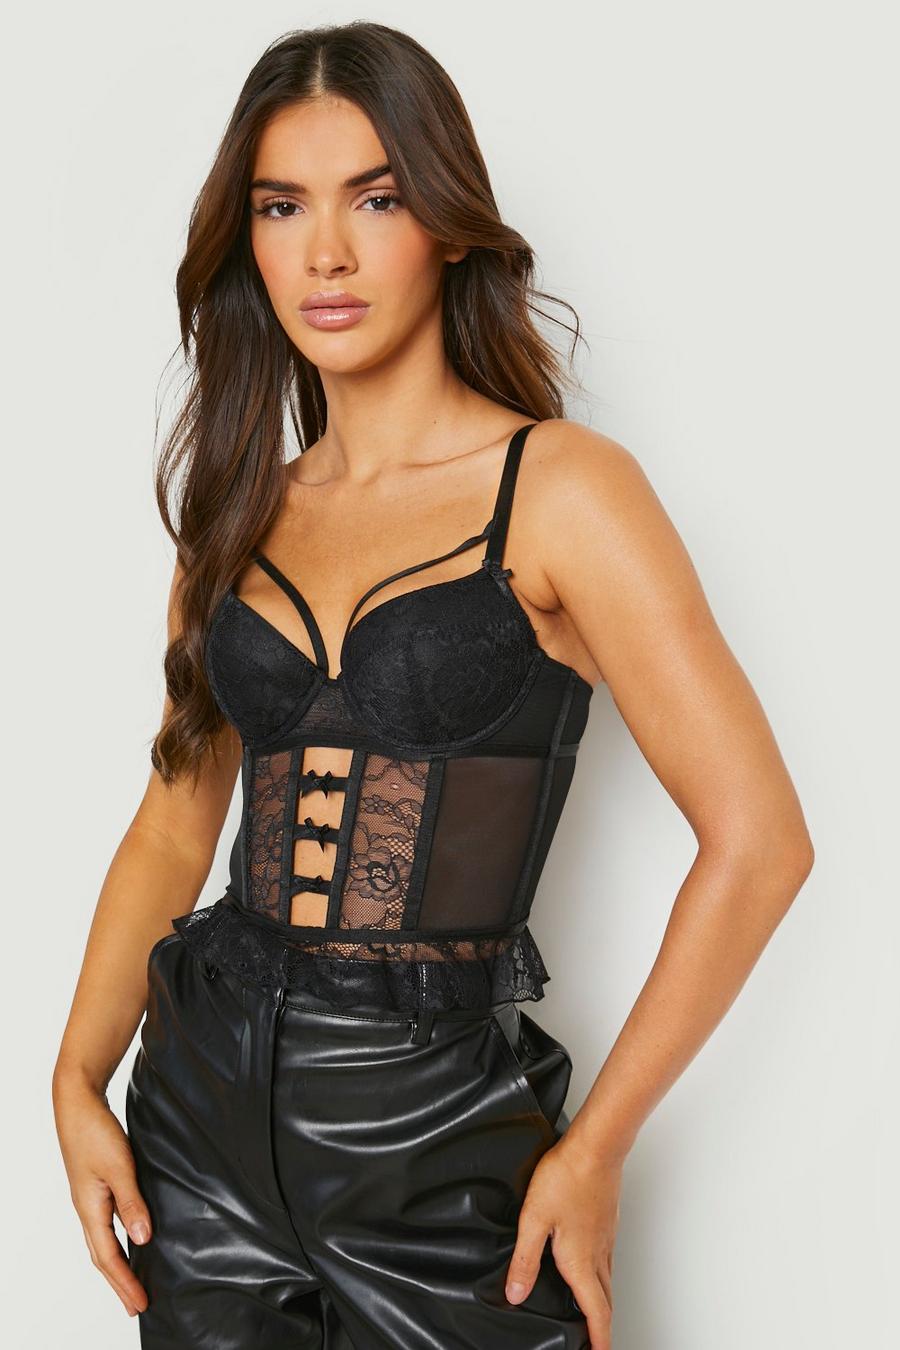 Lace Frill & Cage Detail Cut Out Bra